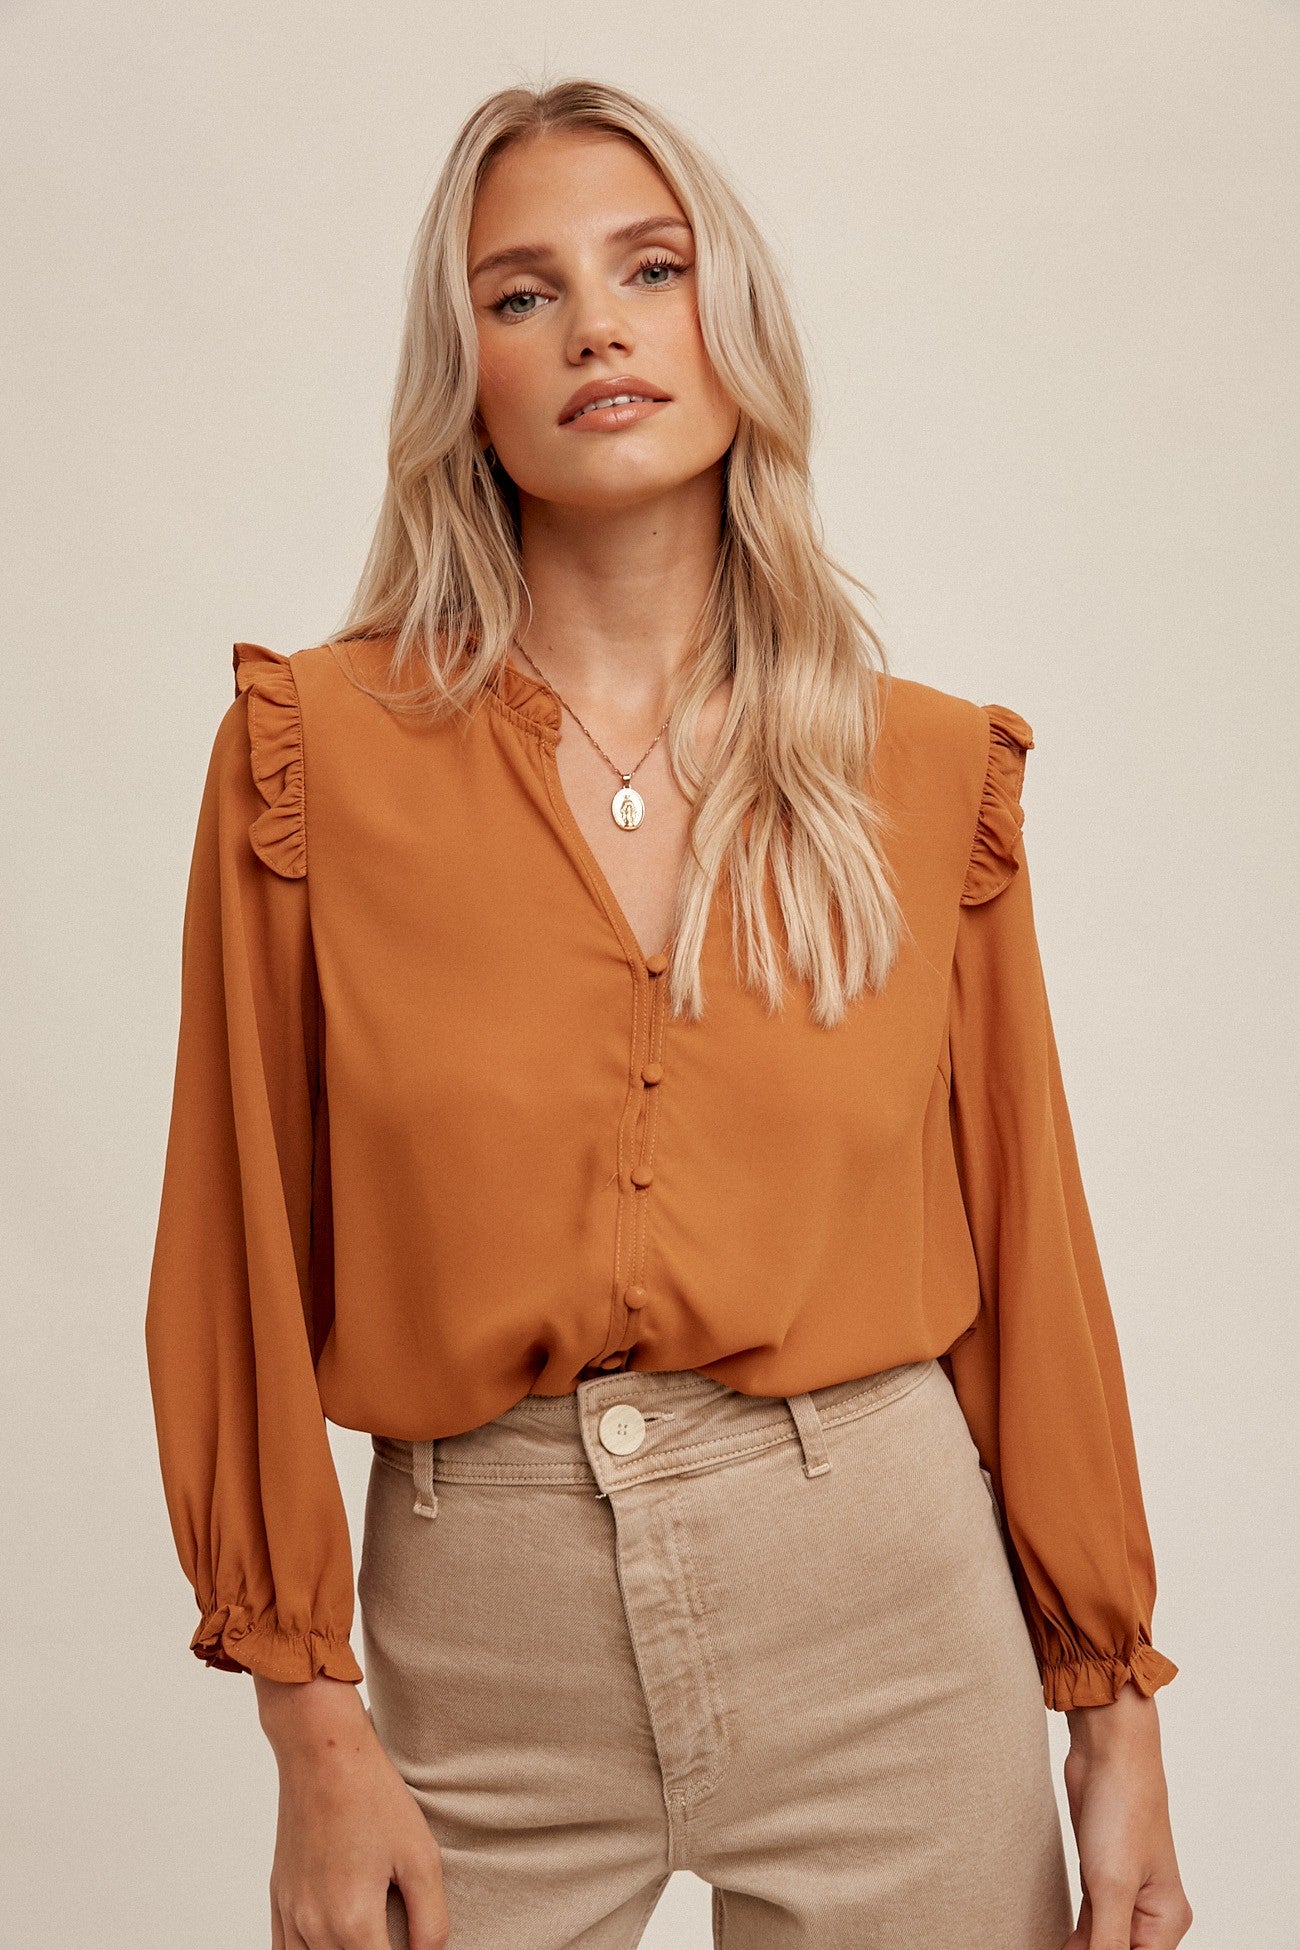 Hem & Thread | Long Sleeve Blouse for Fall | Sweetest Stitch Online